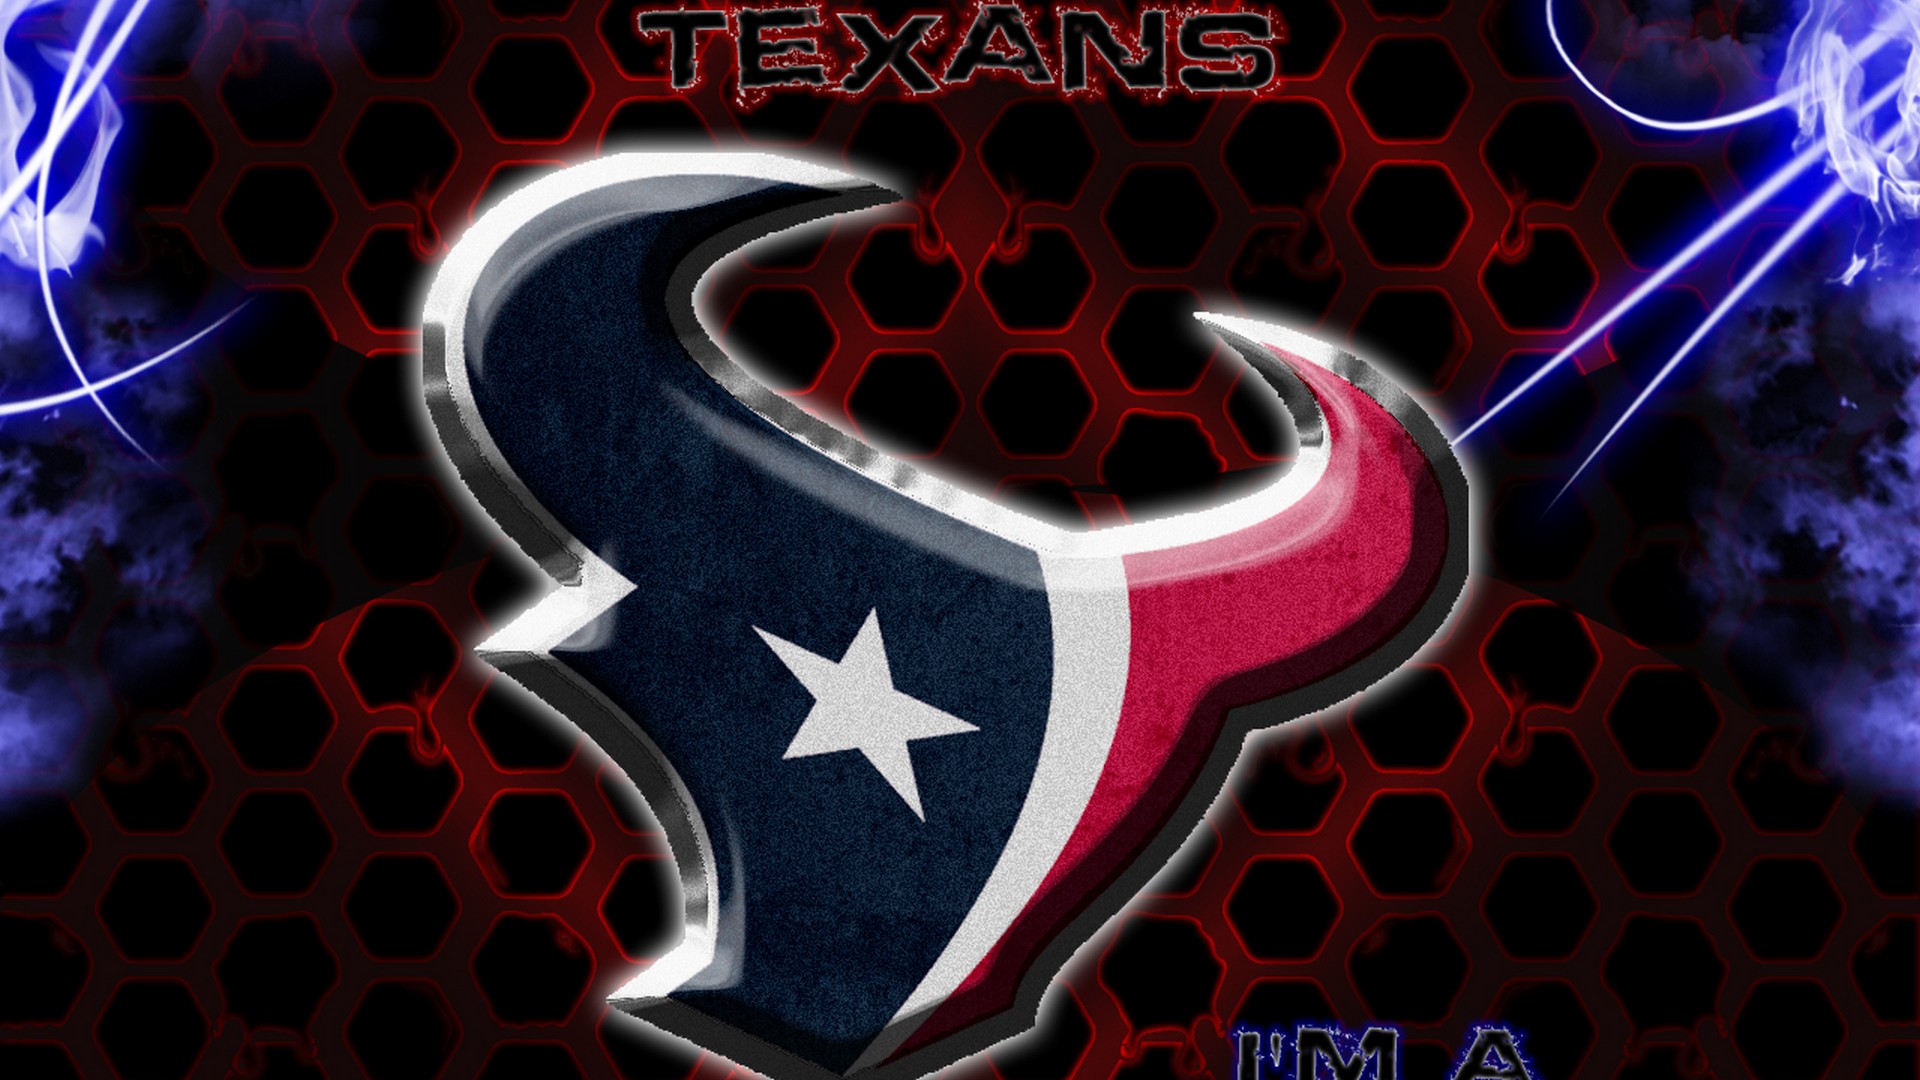 Houston Texans NFL Wallpaper For Mac Backgrounds With Resolution 1920X1080 pixel. You can make this wallpaper for your Mac or Windows Desktop Background, iPhone, Android or Tablet and another Smartphone device for free